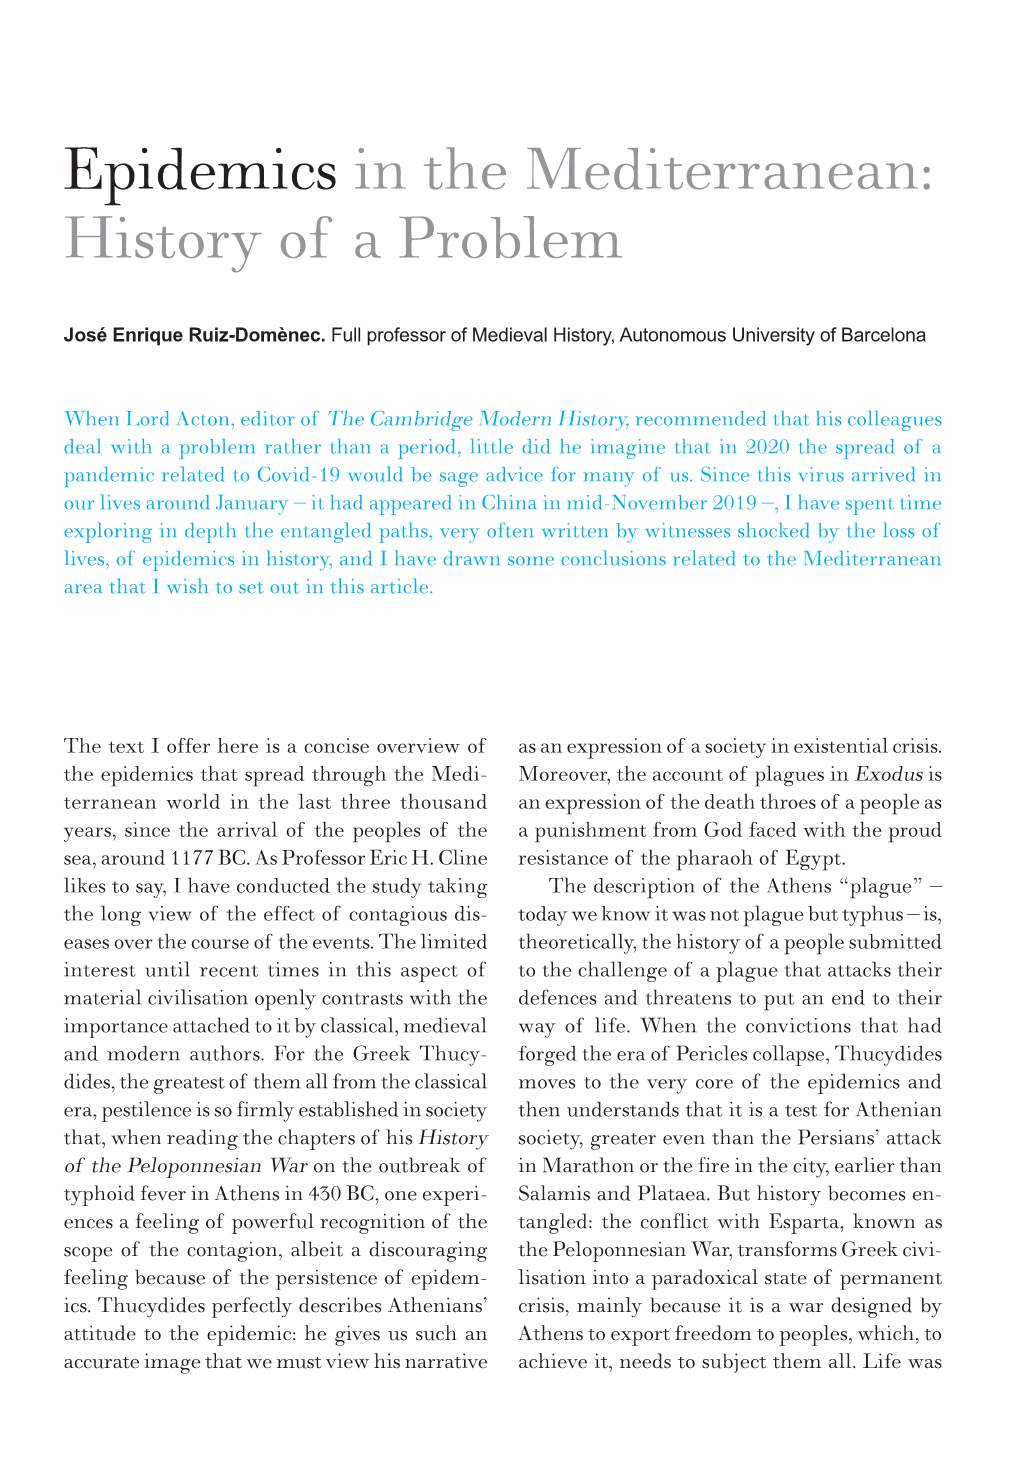 Epidemics in the Mediterranean: History of a Problem